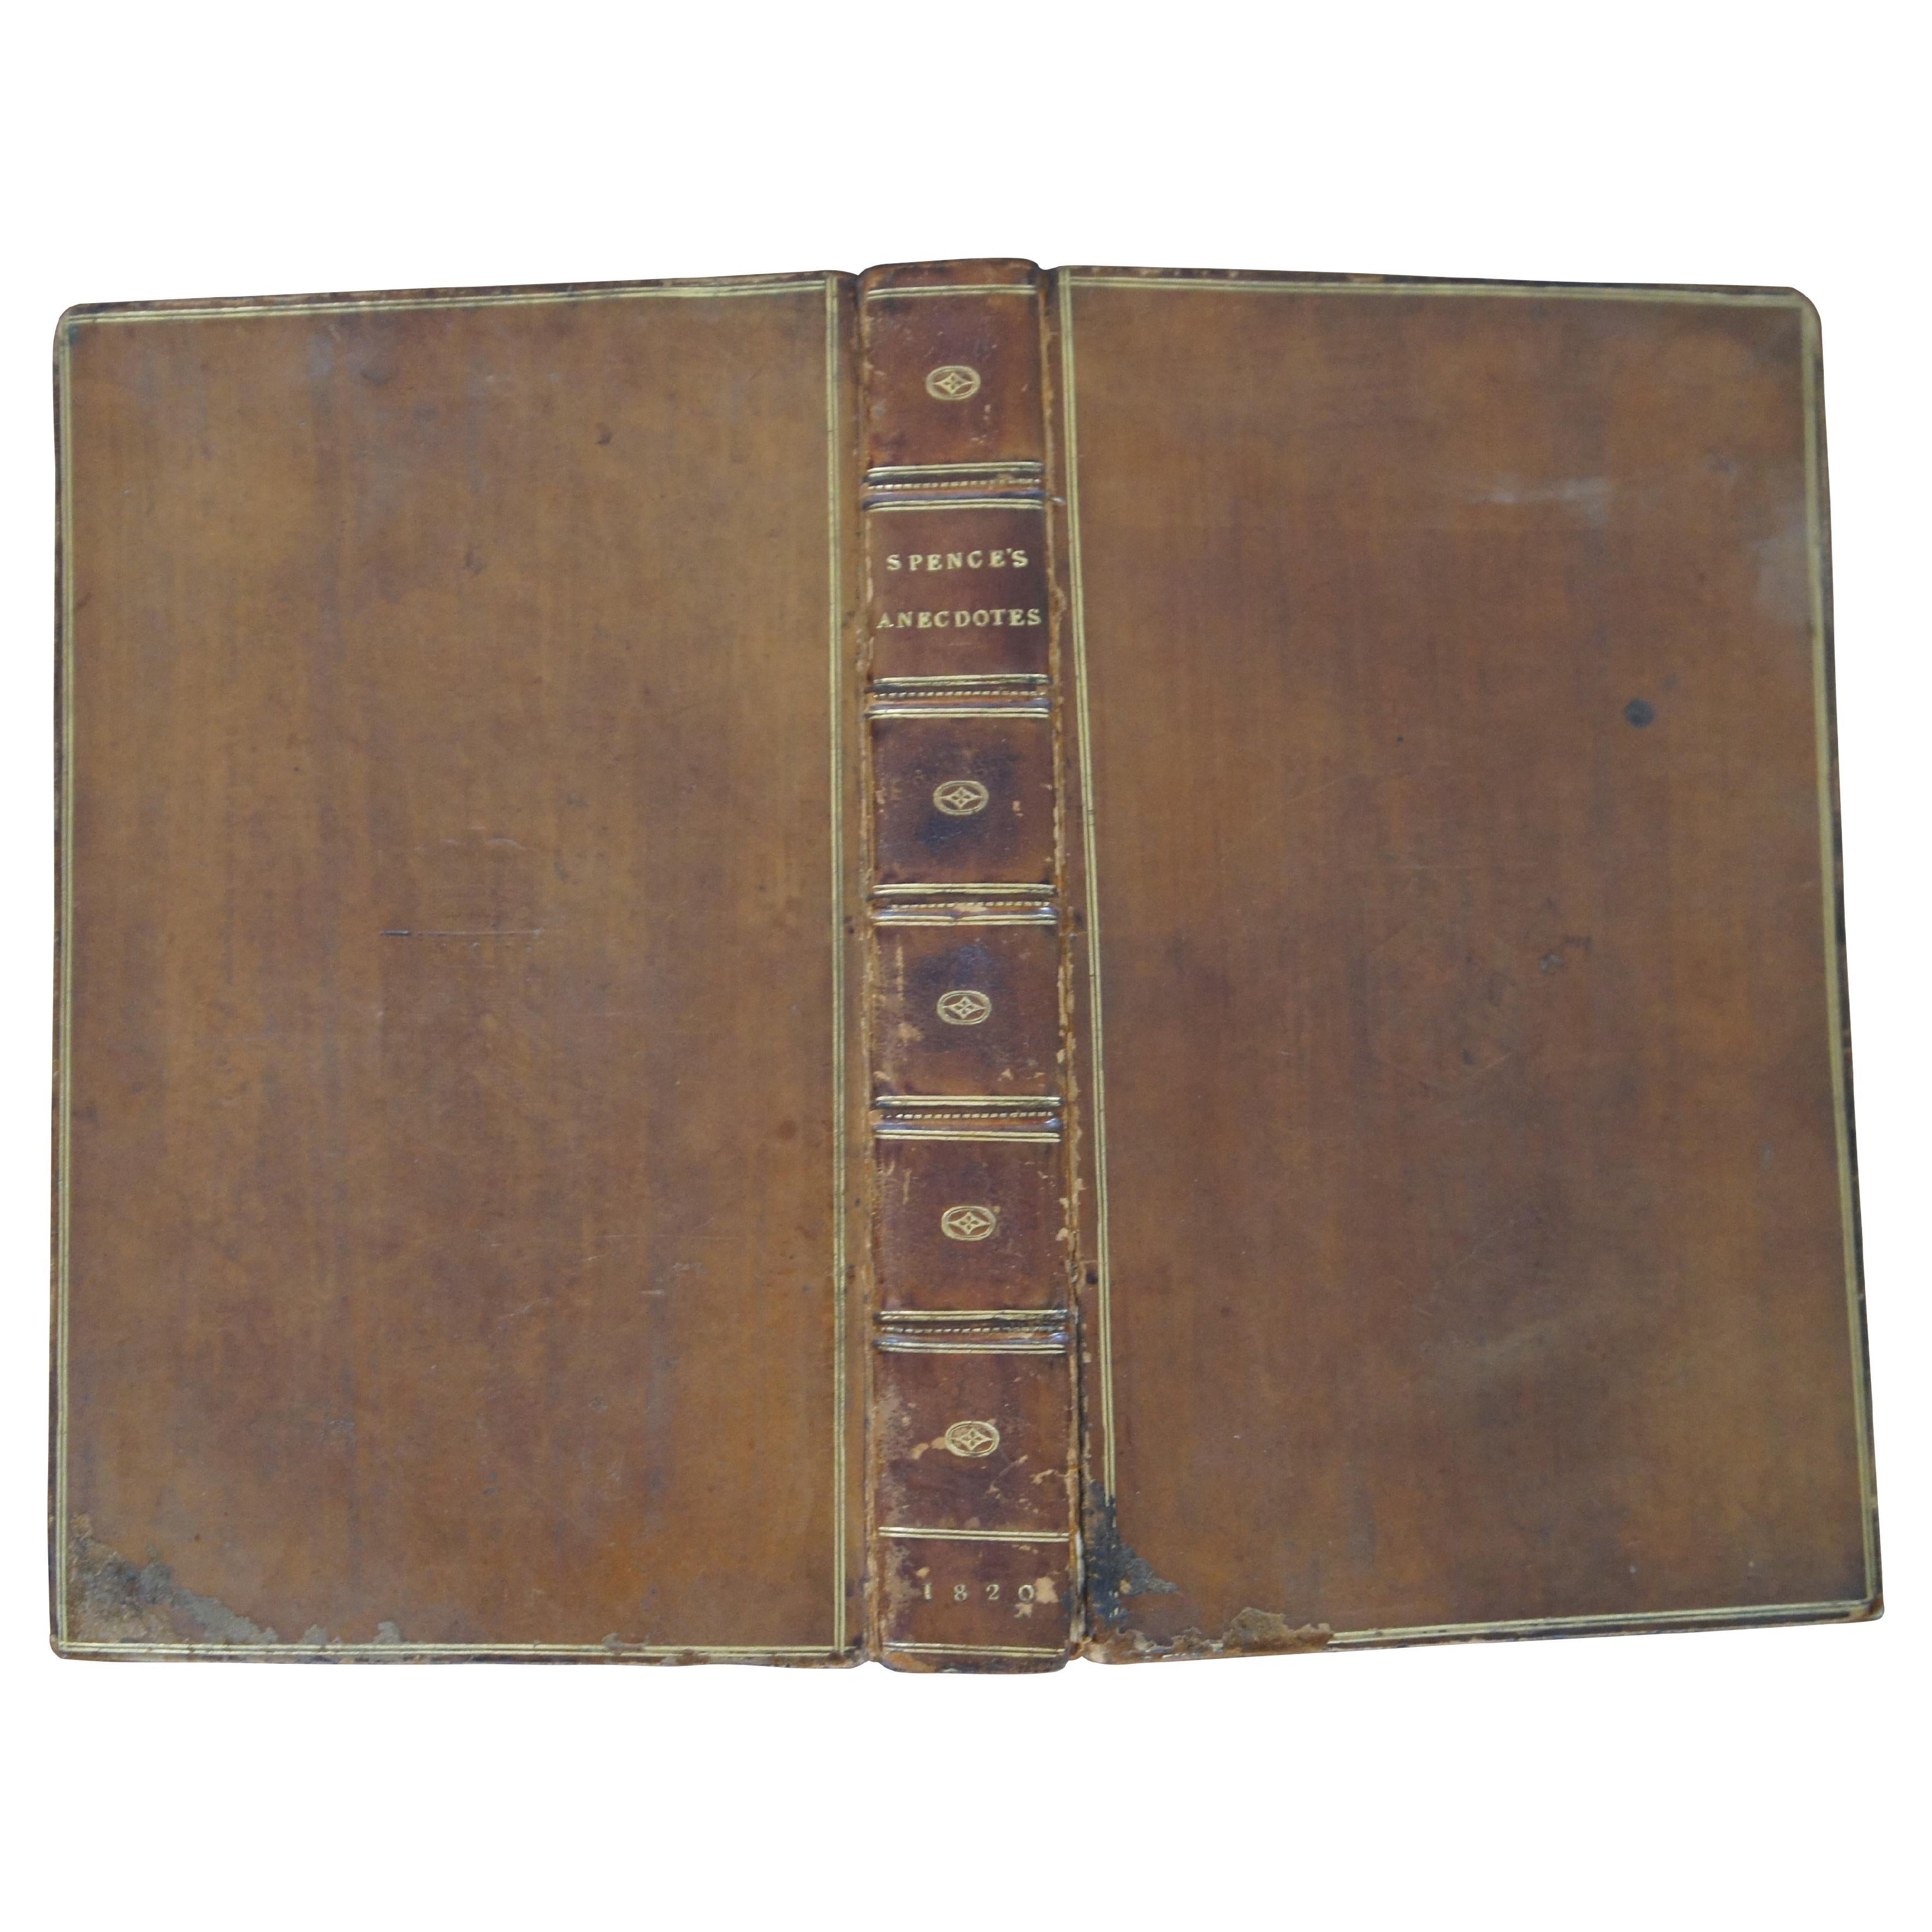 Antique Regency era brown leather bound hard cover book titled “Anecdotes, Observations, and Characters, of Books and Men. Collected from the Conversation of Mr. Pope, and Other Eminent Persons of His time” by the Reverend Joseph Spence – Now First